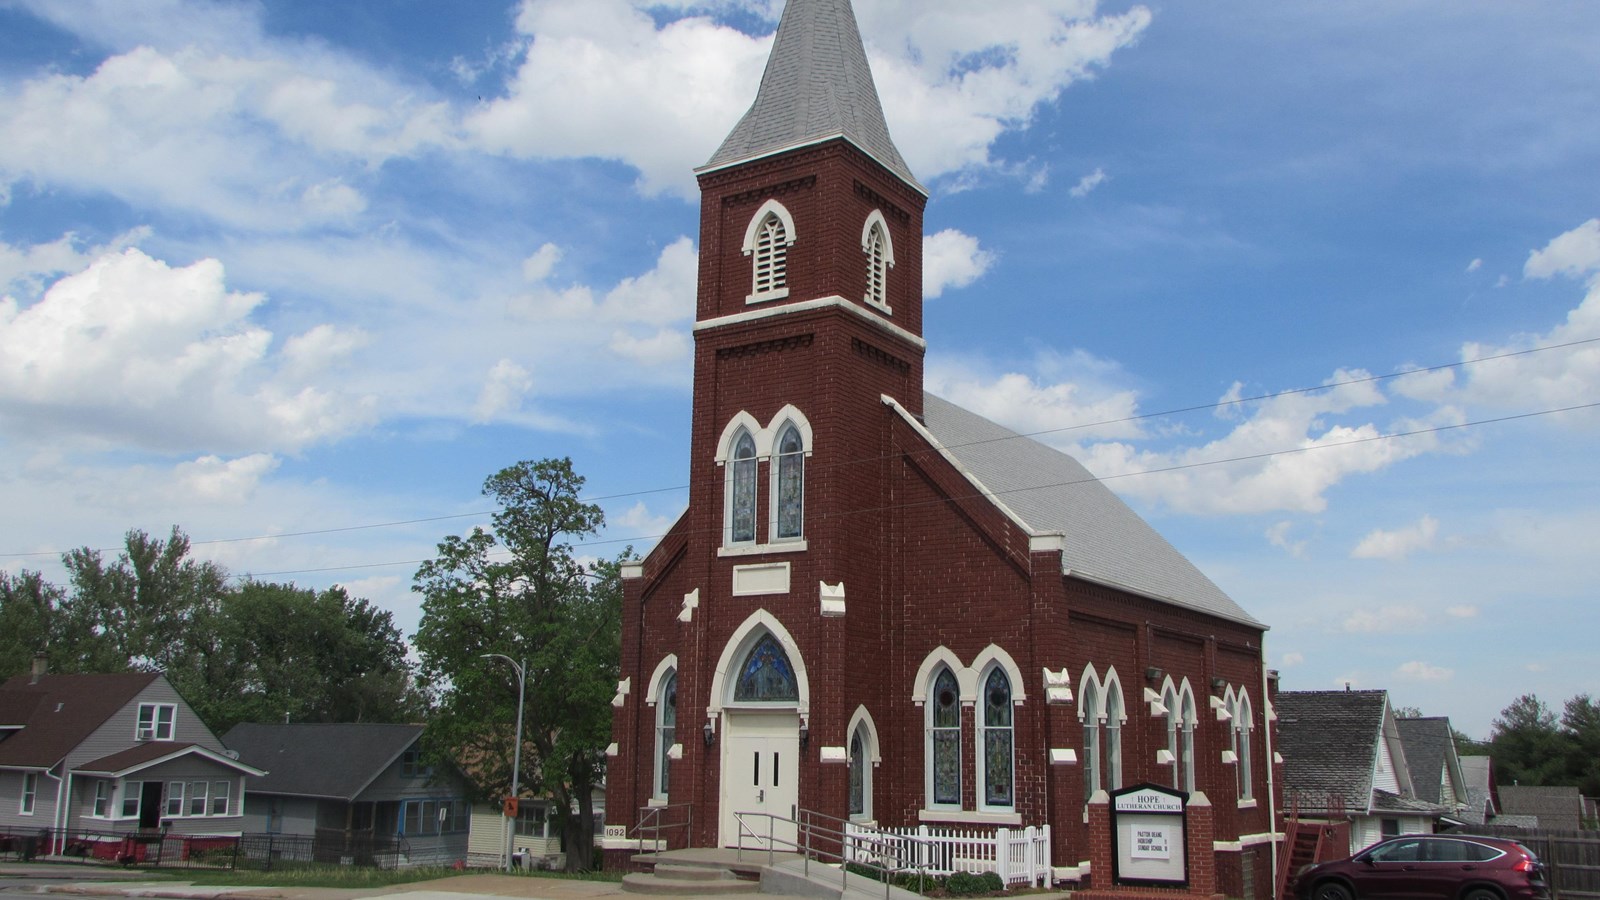 Brick, Gothic Revival church. Gabled end, center steeple and entrance. Pointed-arch windows